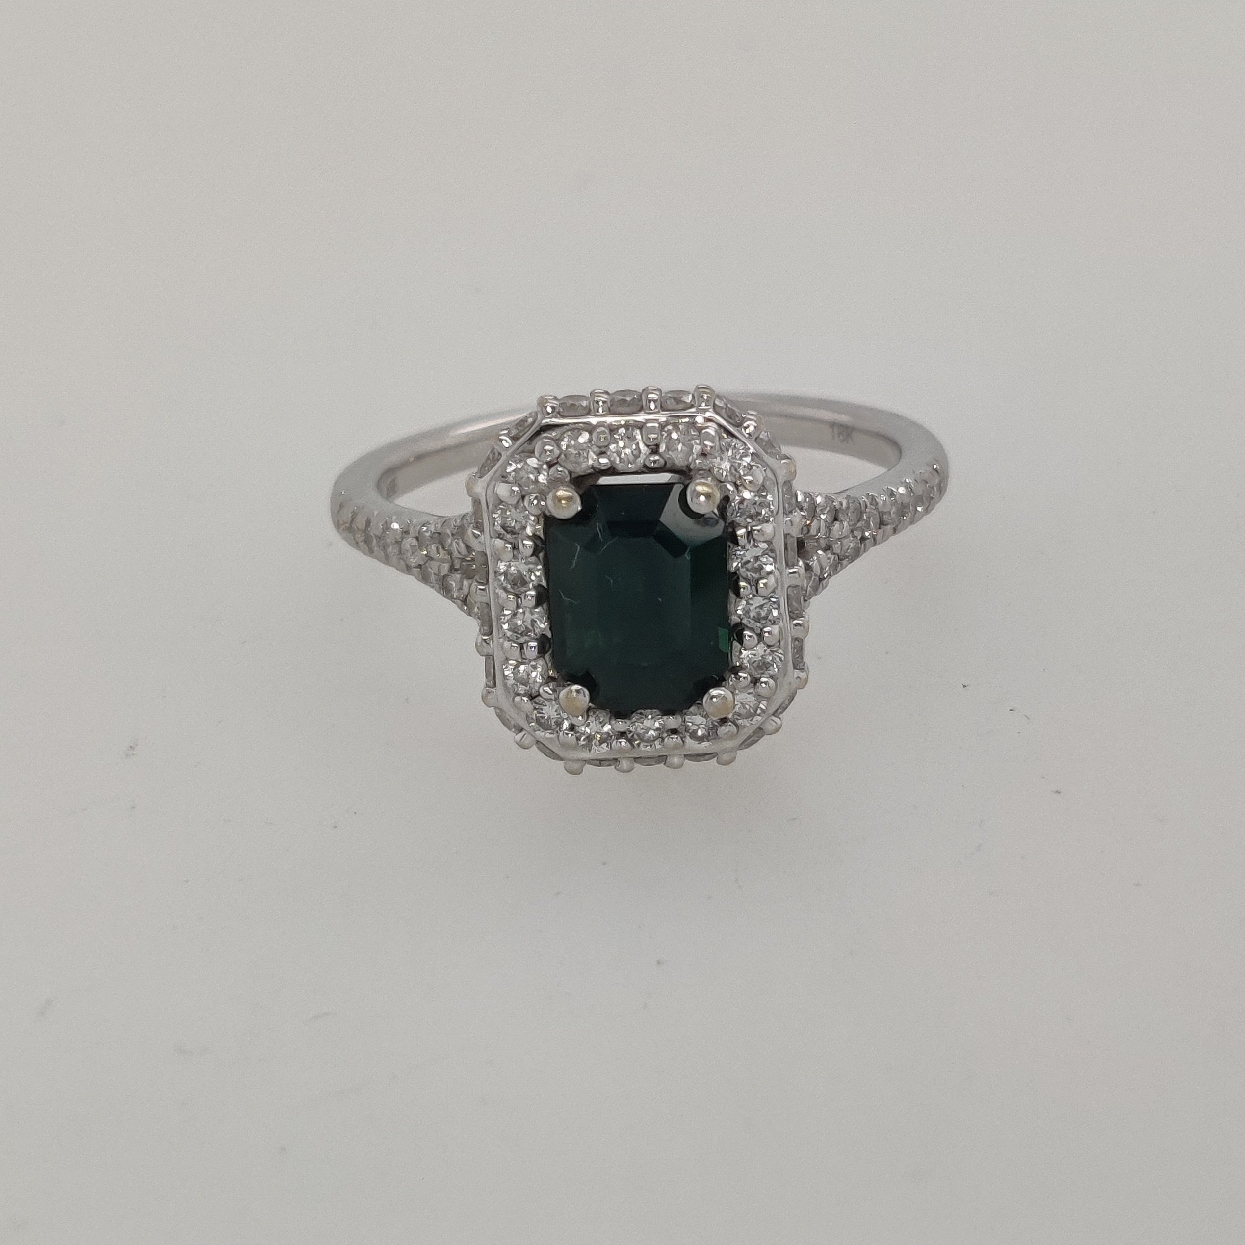 18k White Gold Circa Ring with .5CT of Diamonds and 1.23CT Emerald Cut Teal Green Sapphire Made by Brilliant Earth Size 6.25